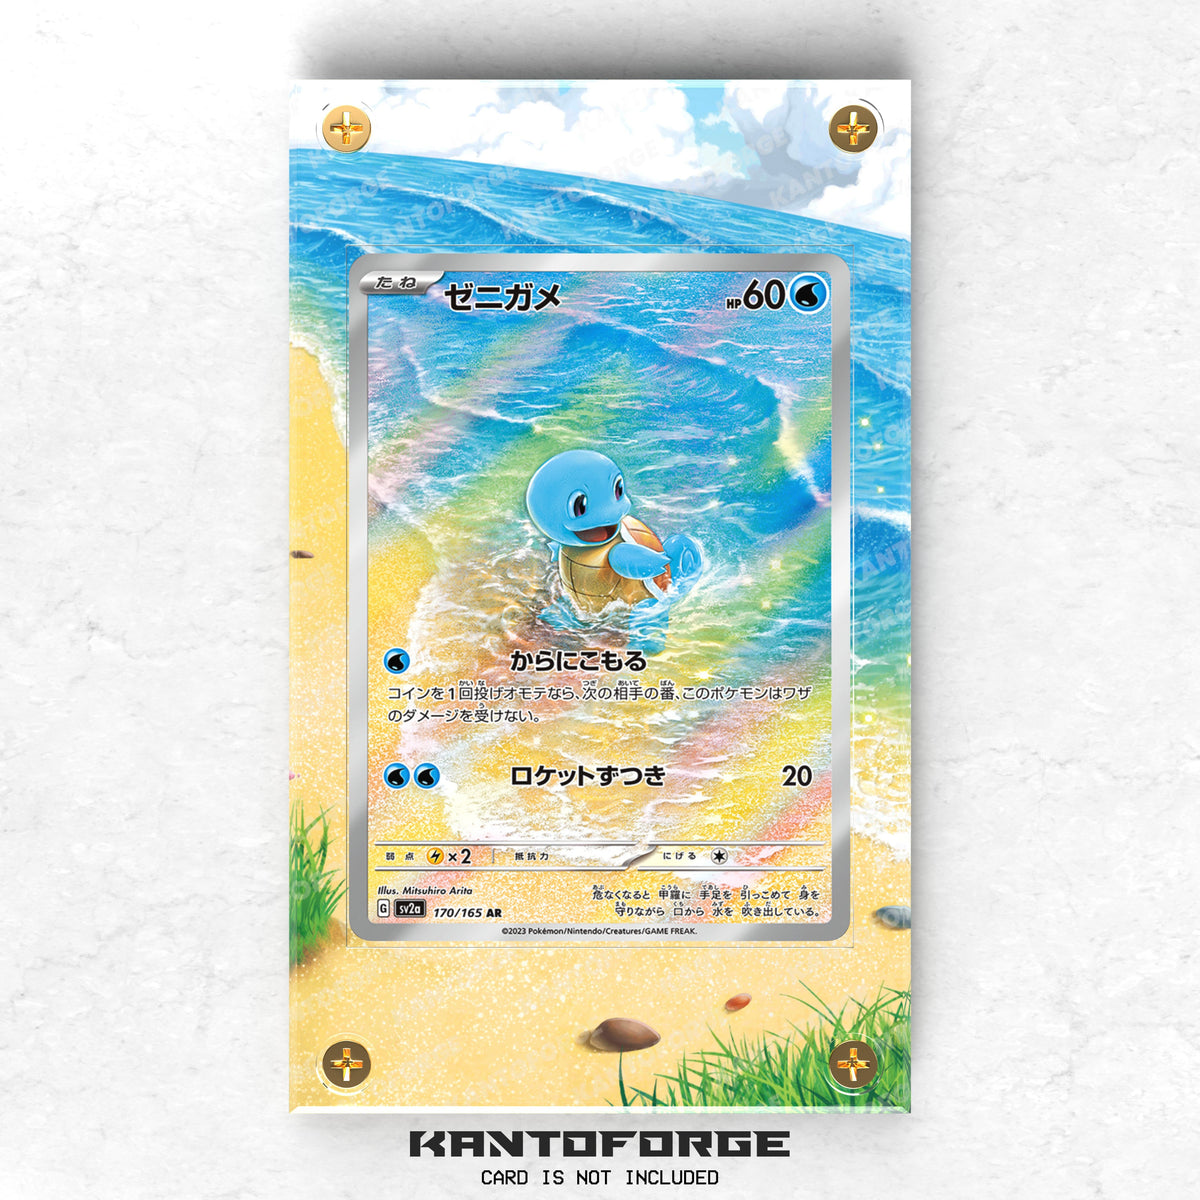 Squirtle (ゼニガメ) 170/165 - Pokémon Extended Artwork Protective Card Display Case